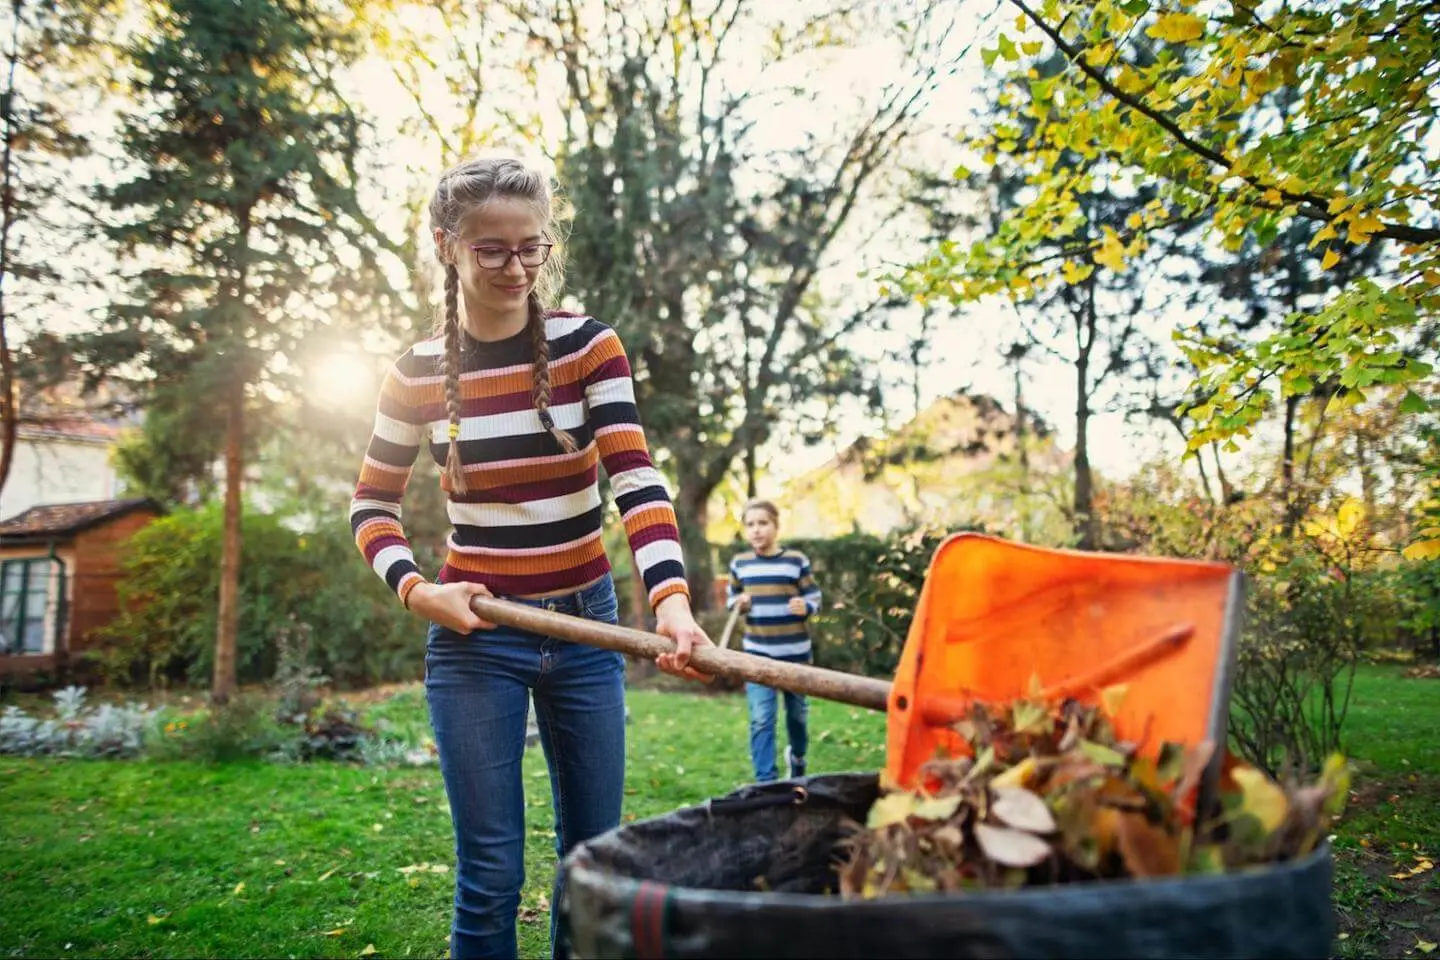 Best jobs for teens: teenager using a plastic shovel to clean their garden